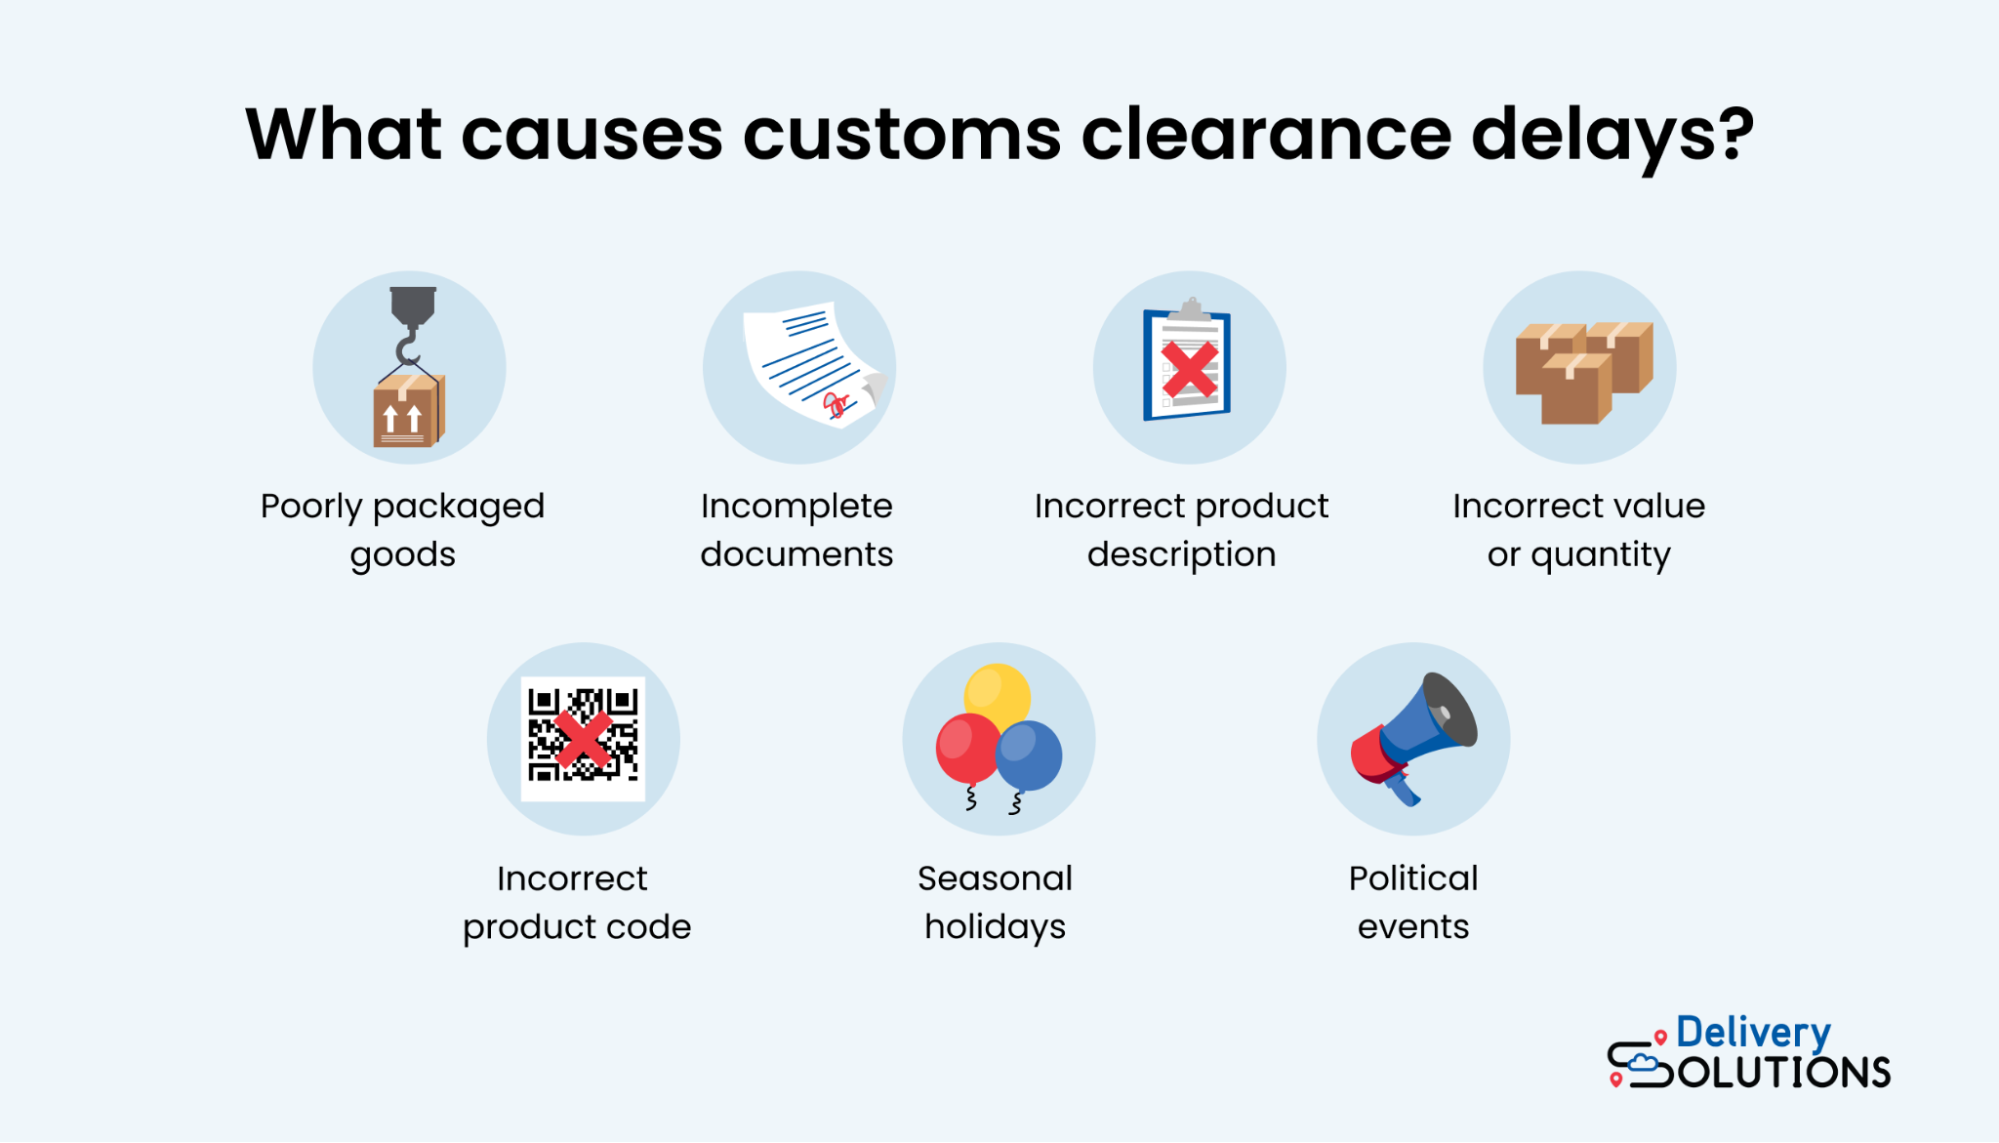 Customs clearance delay causes